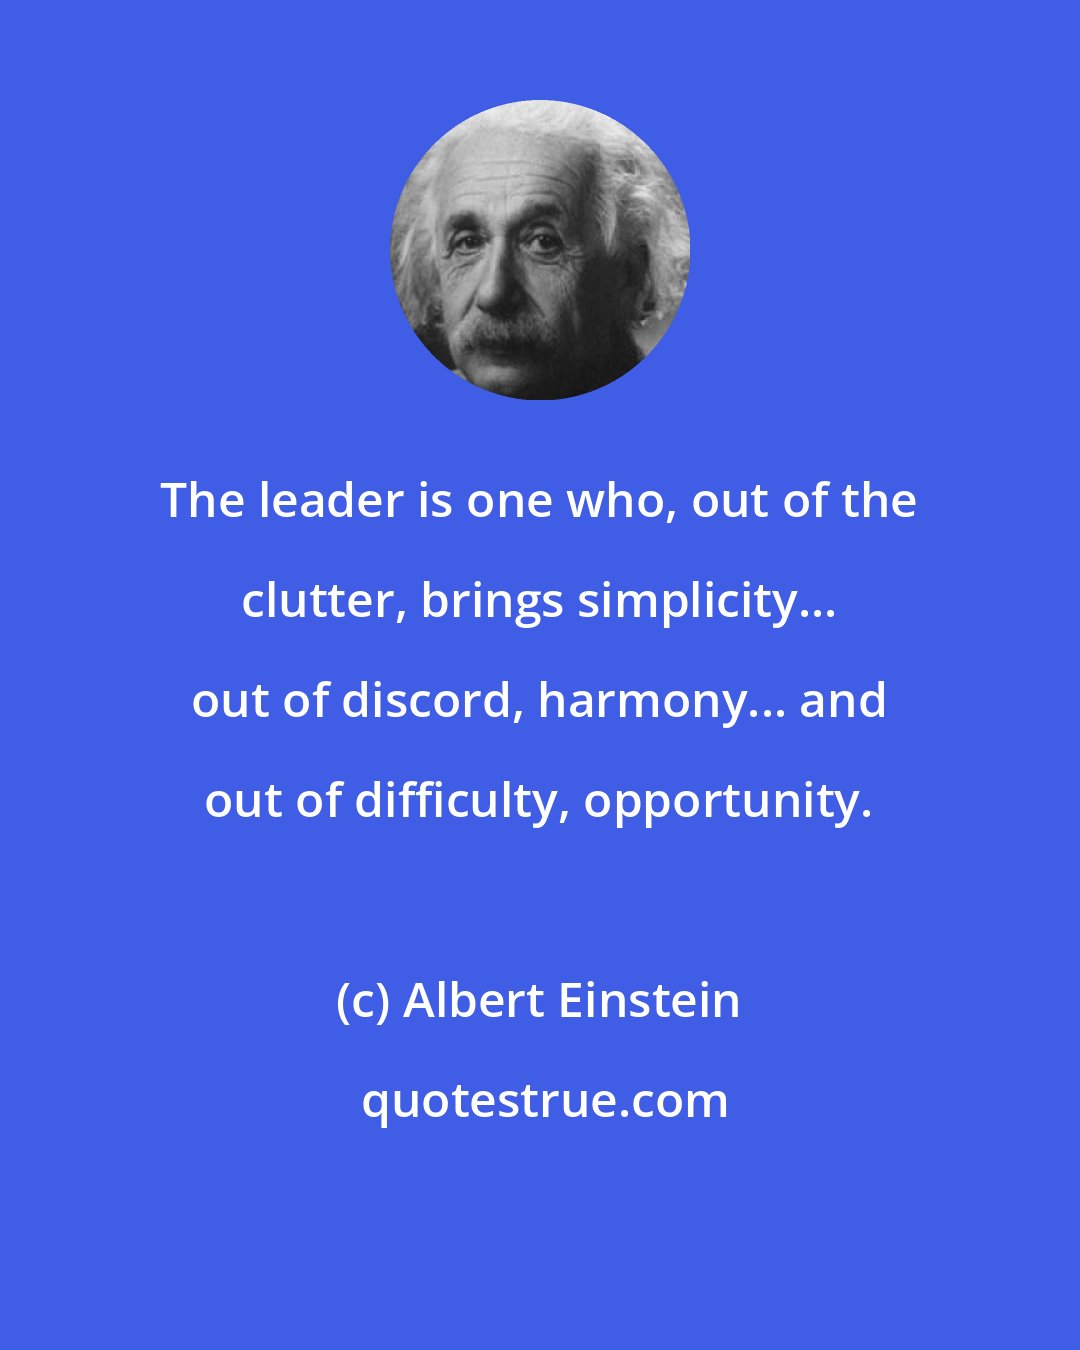 Albert Einstein: The leader is one who, out of the clutter, brings simplicity... out of discord, harmony... and out of difficulty, opportunity.